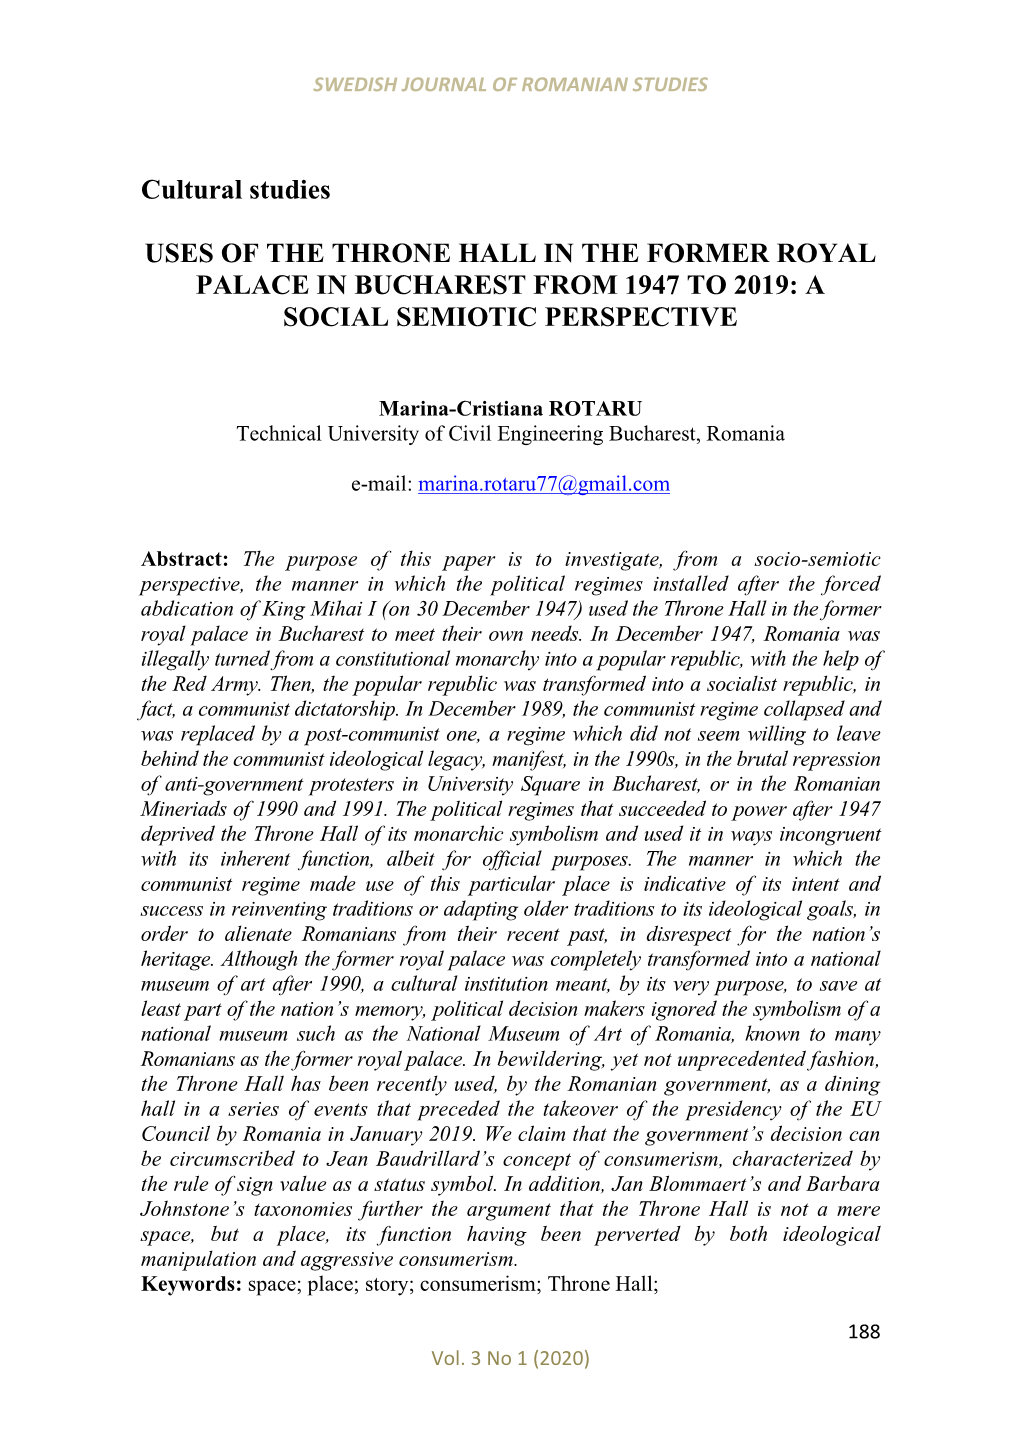 Cultural Studies USES of the THRONE HALL in the FORMER